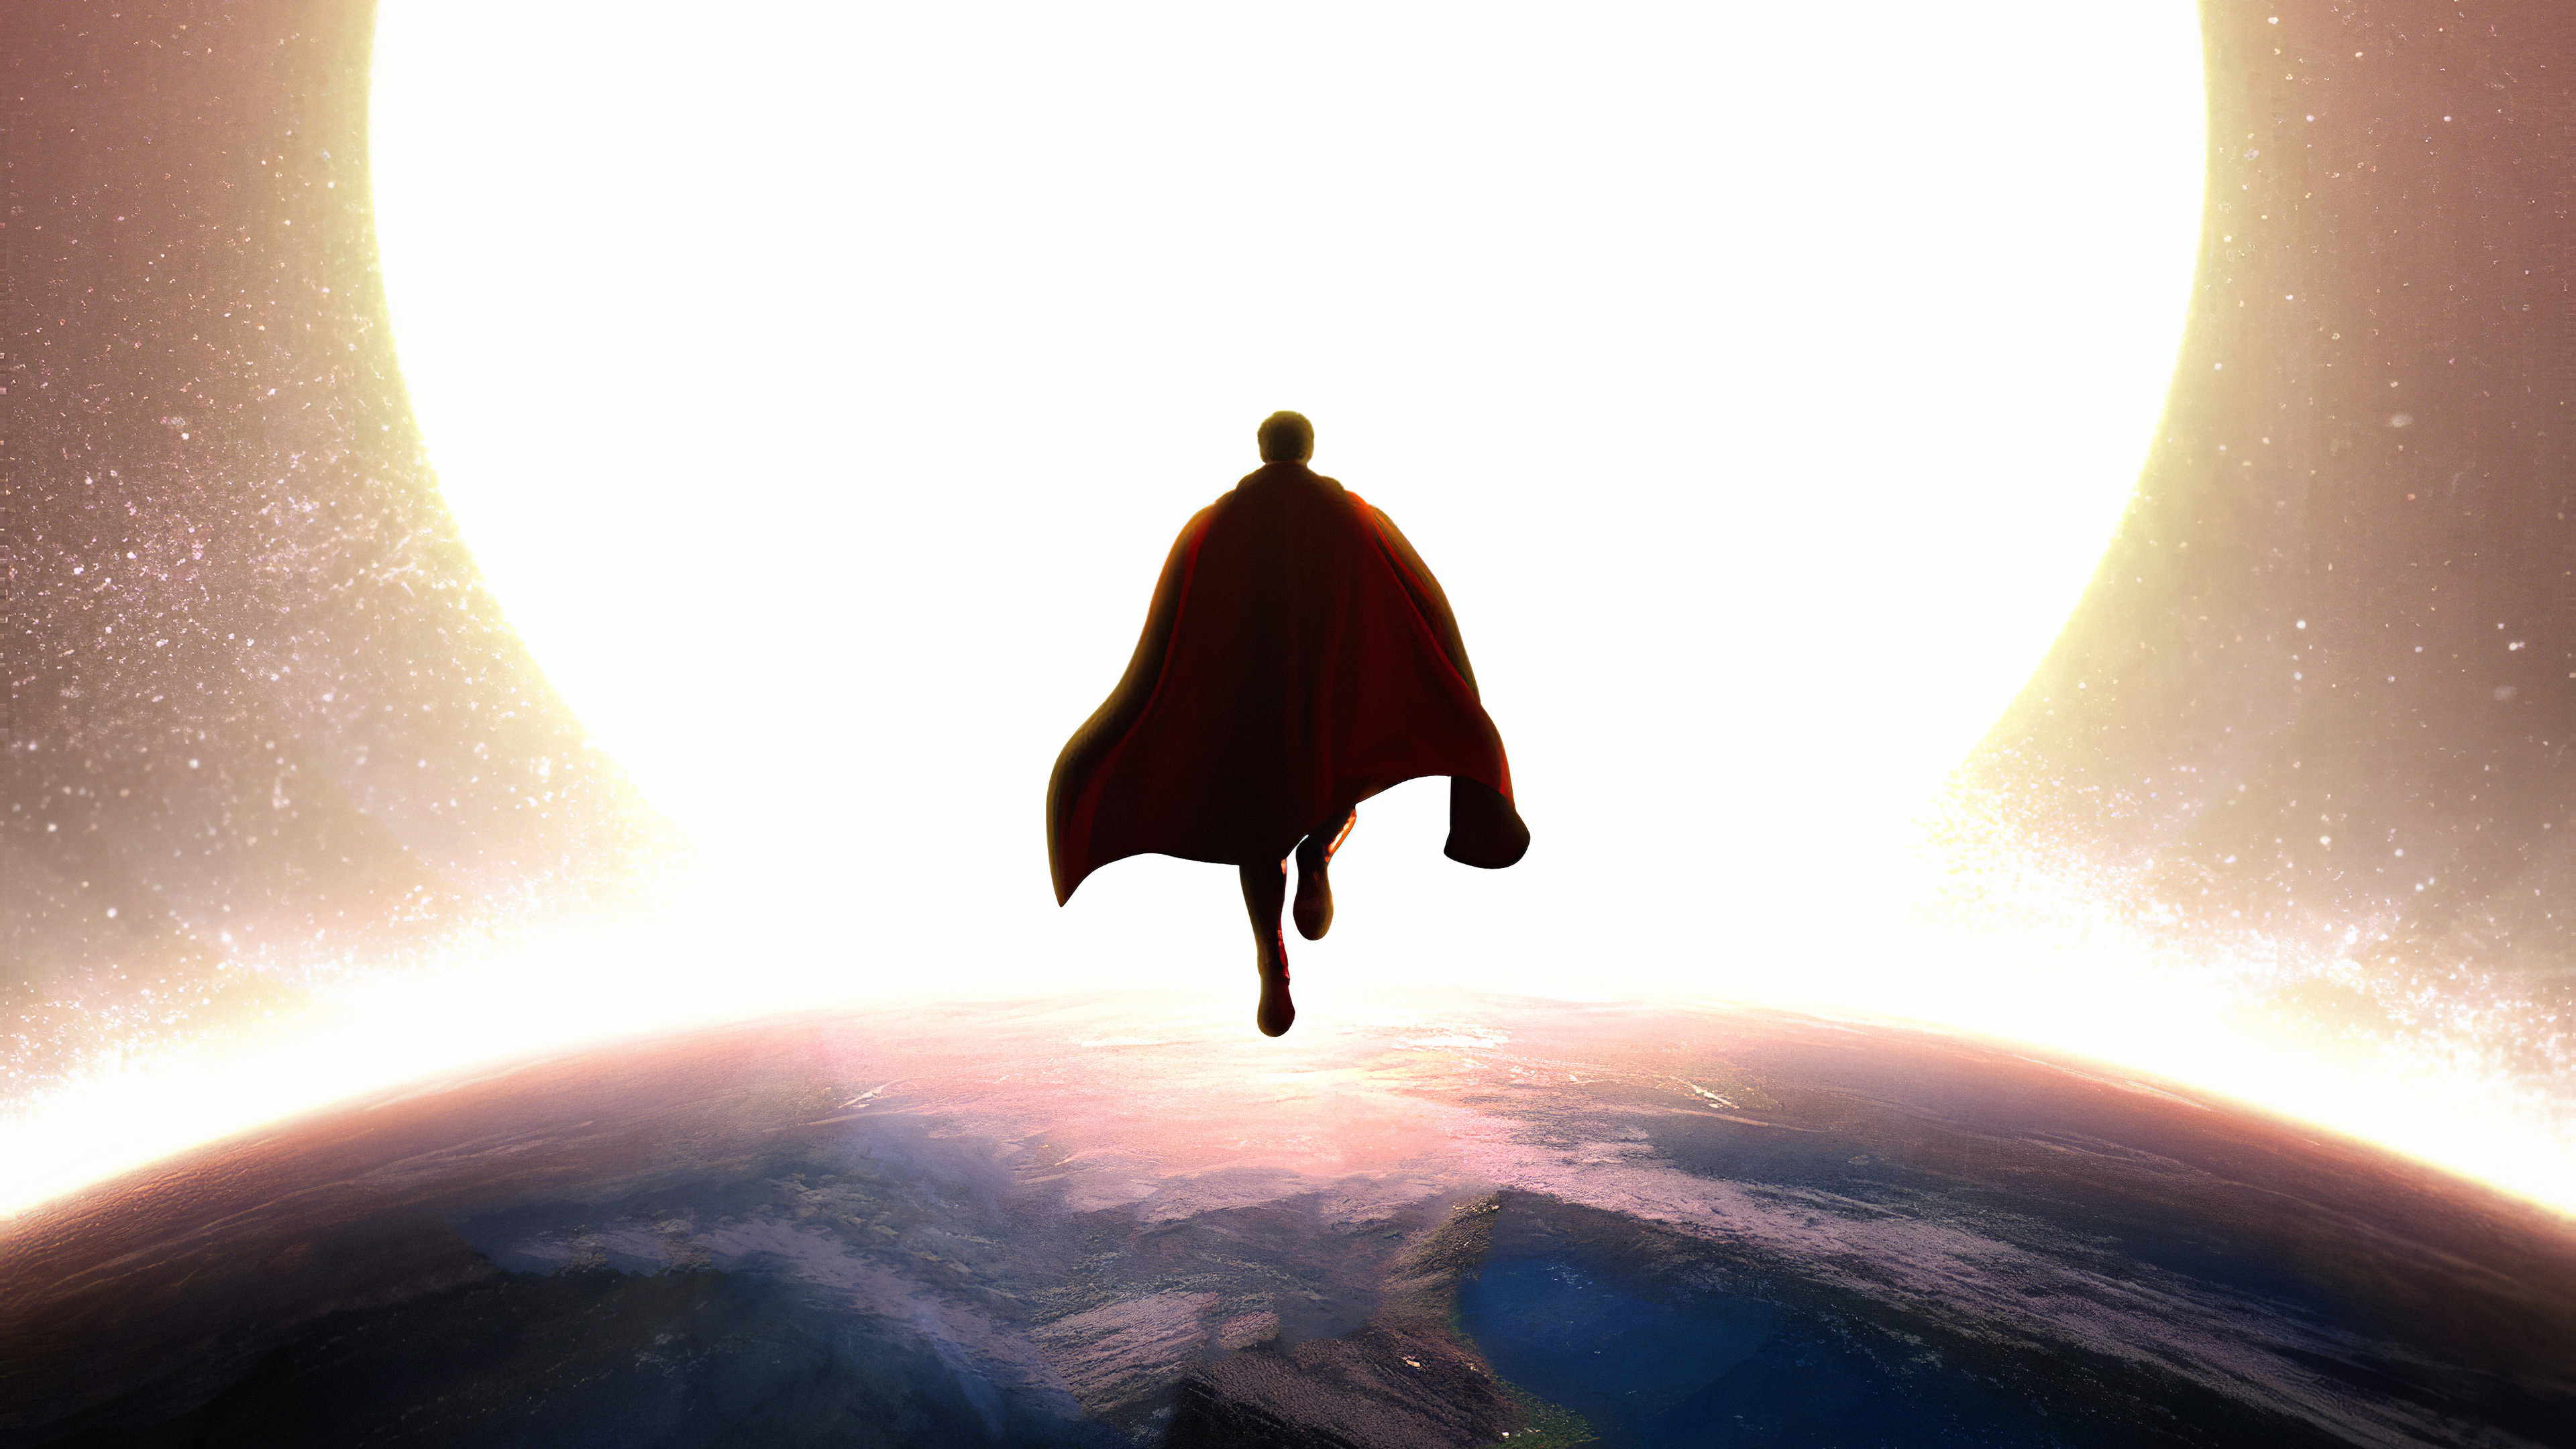 Superman In Sky Art - Time Really Slow Motion & Giant Apes Cover - HD Wallpaper 